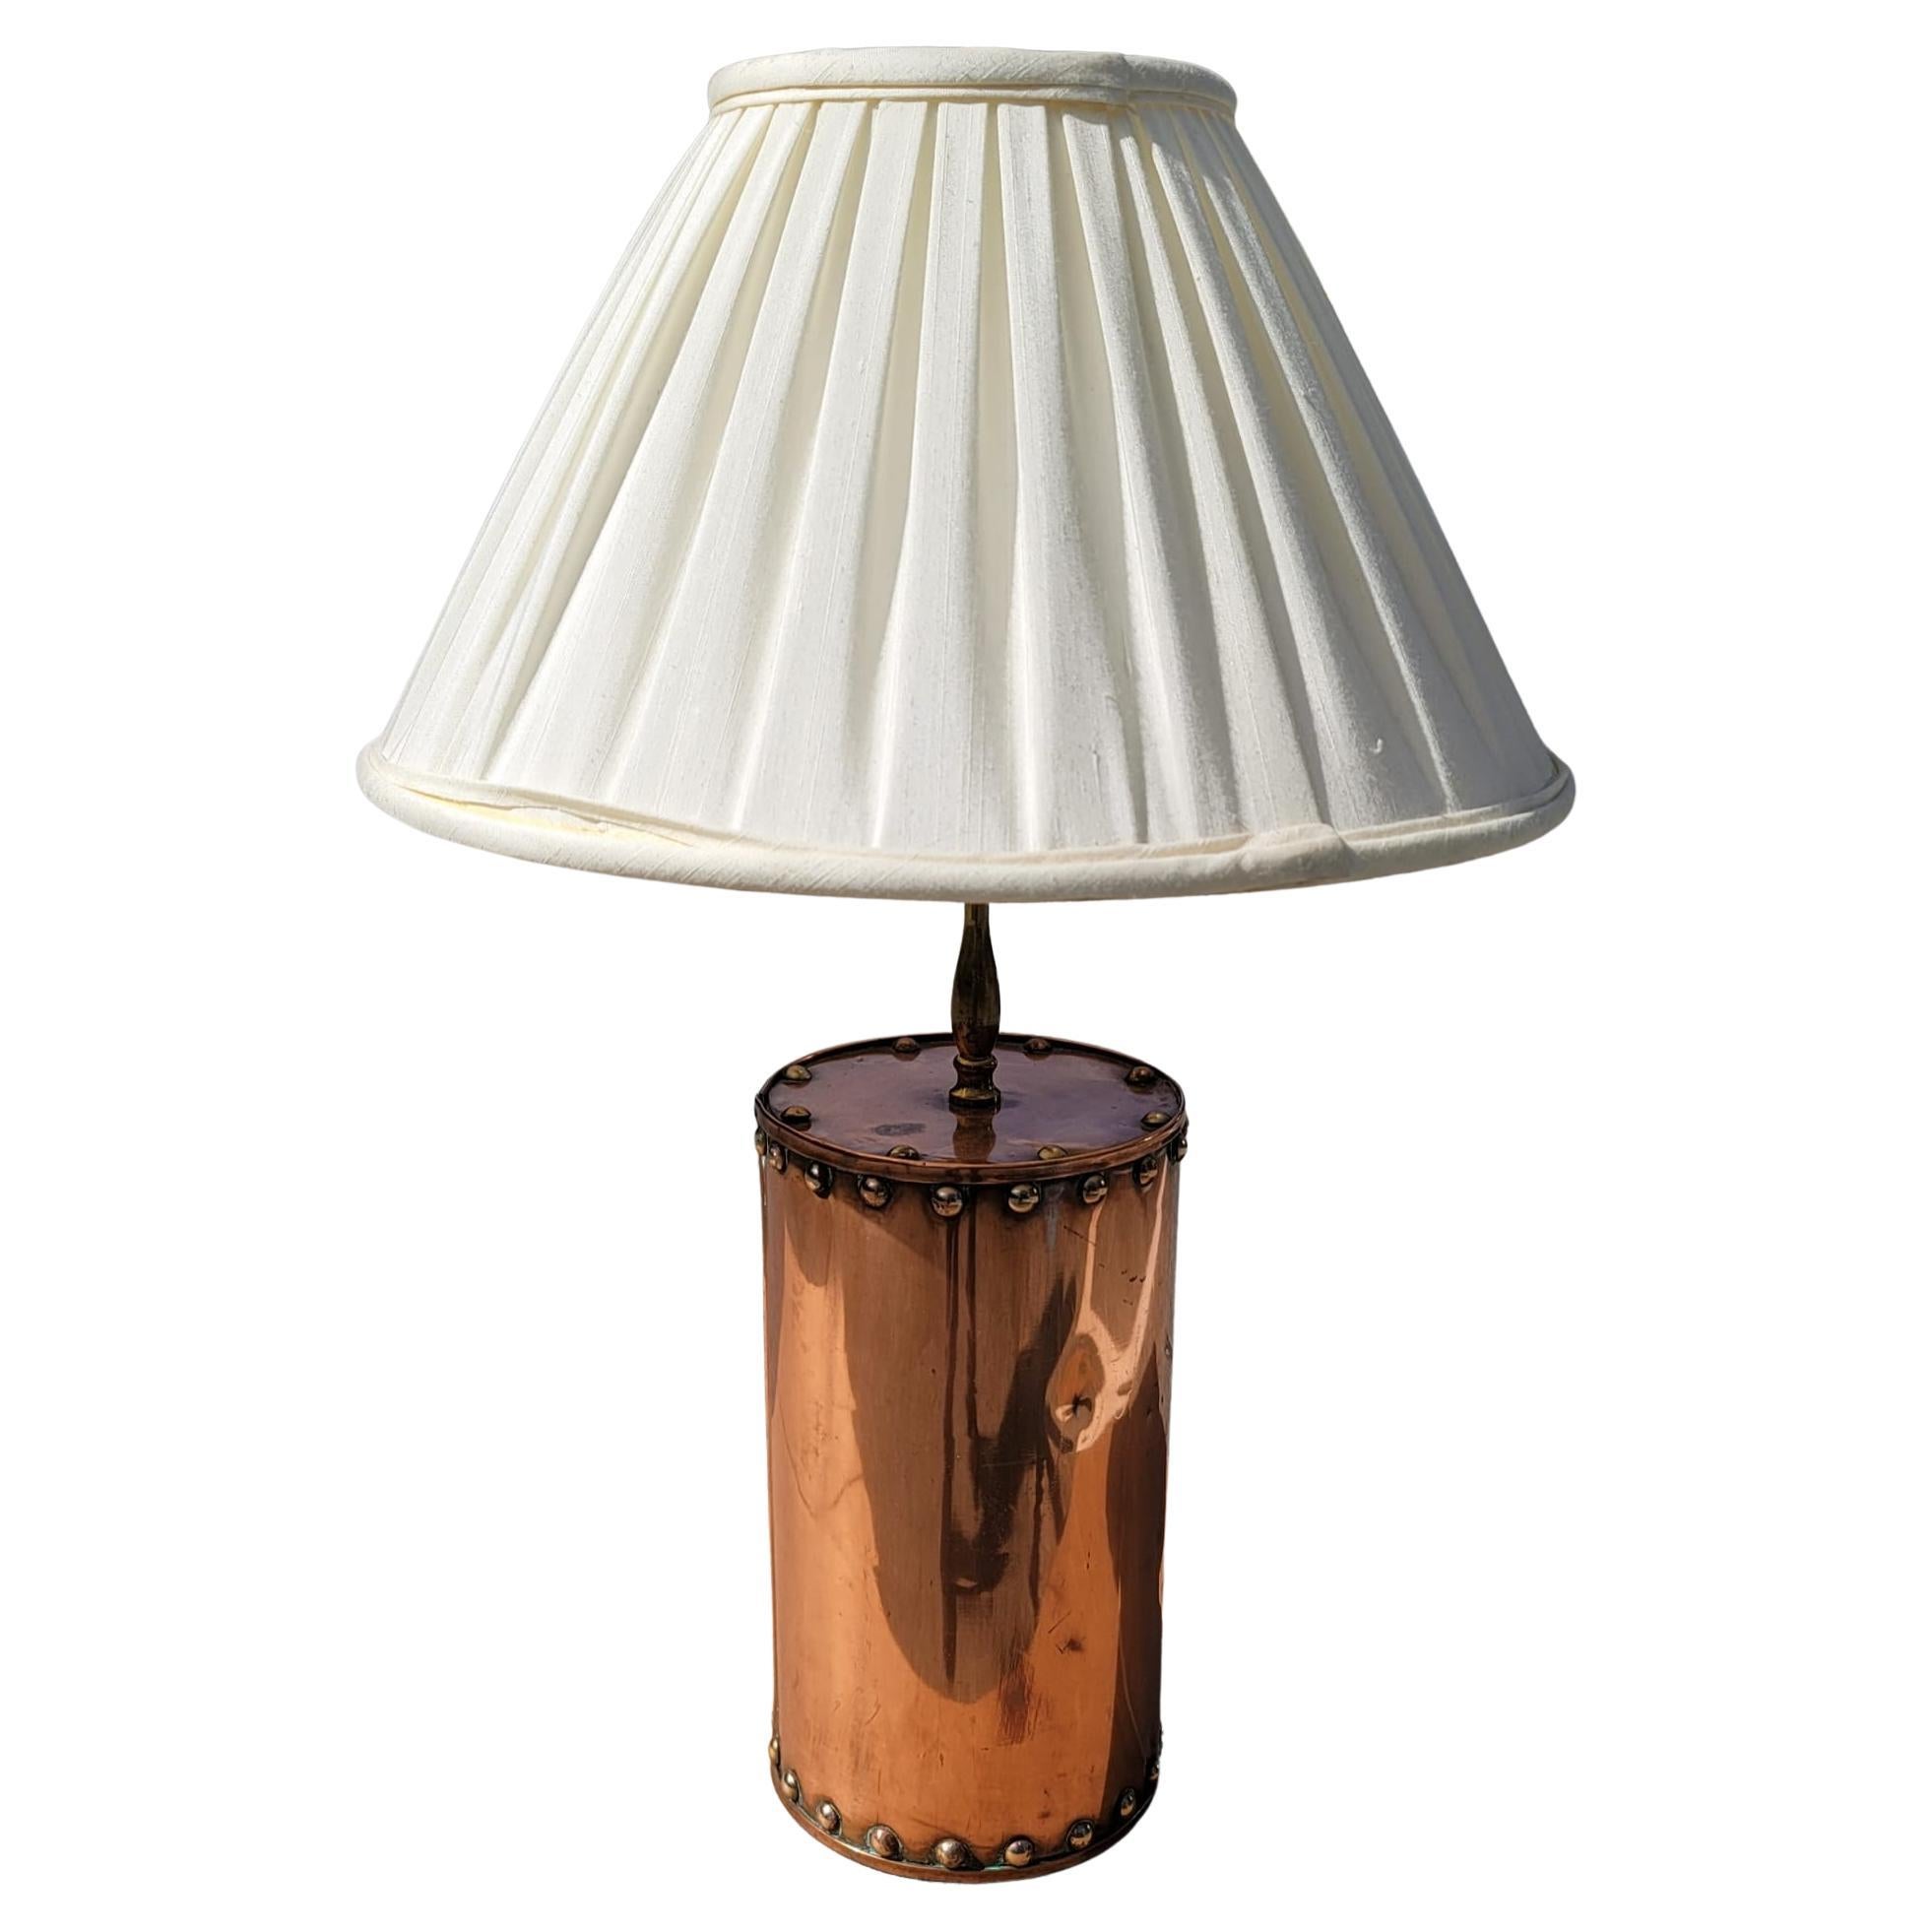 Metalwork American Arts and Crafts Copper & Nailhead Drum Table Lamp For Sale